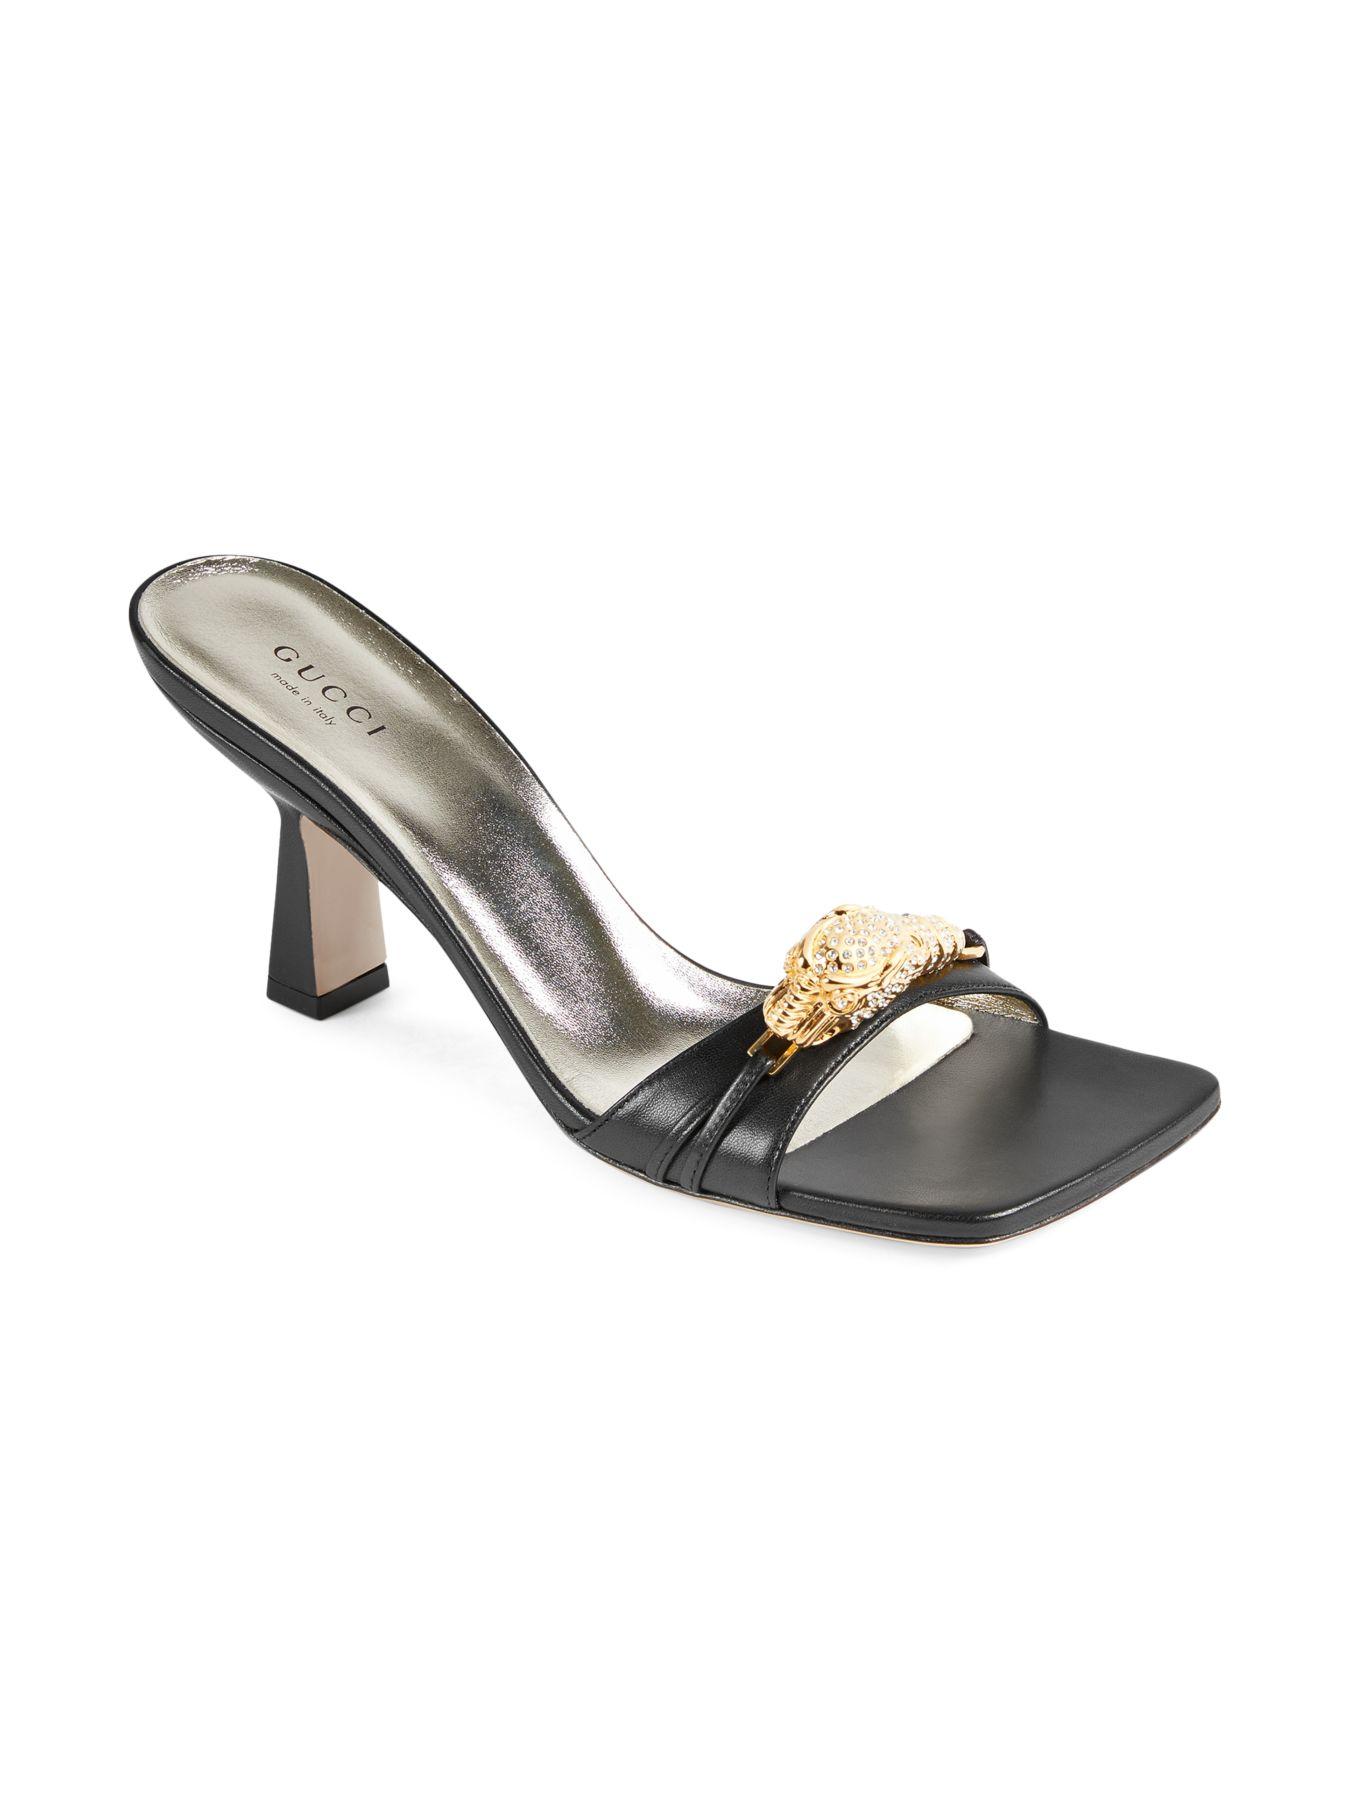 Gucci Leather Tiger Head Sandals in Black - Lyst